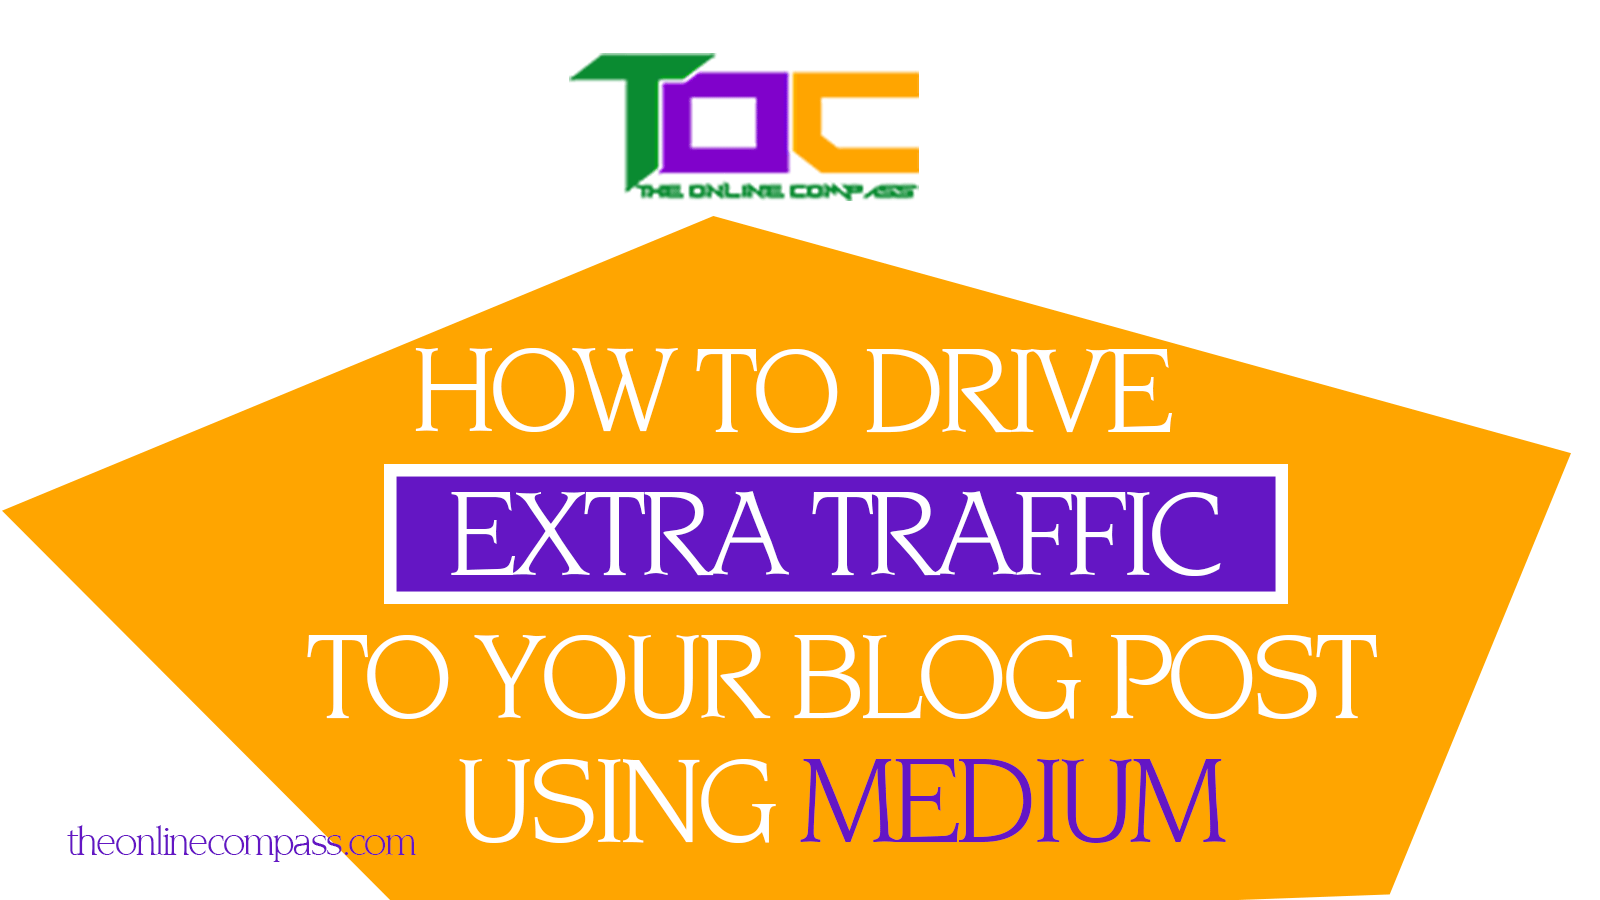 How to generate traffic to your blog from medium to your blog post